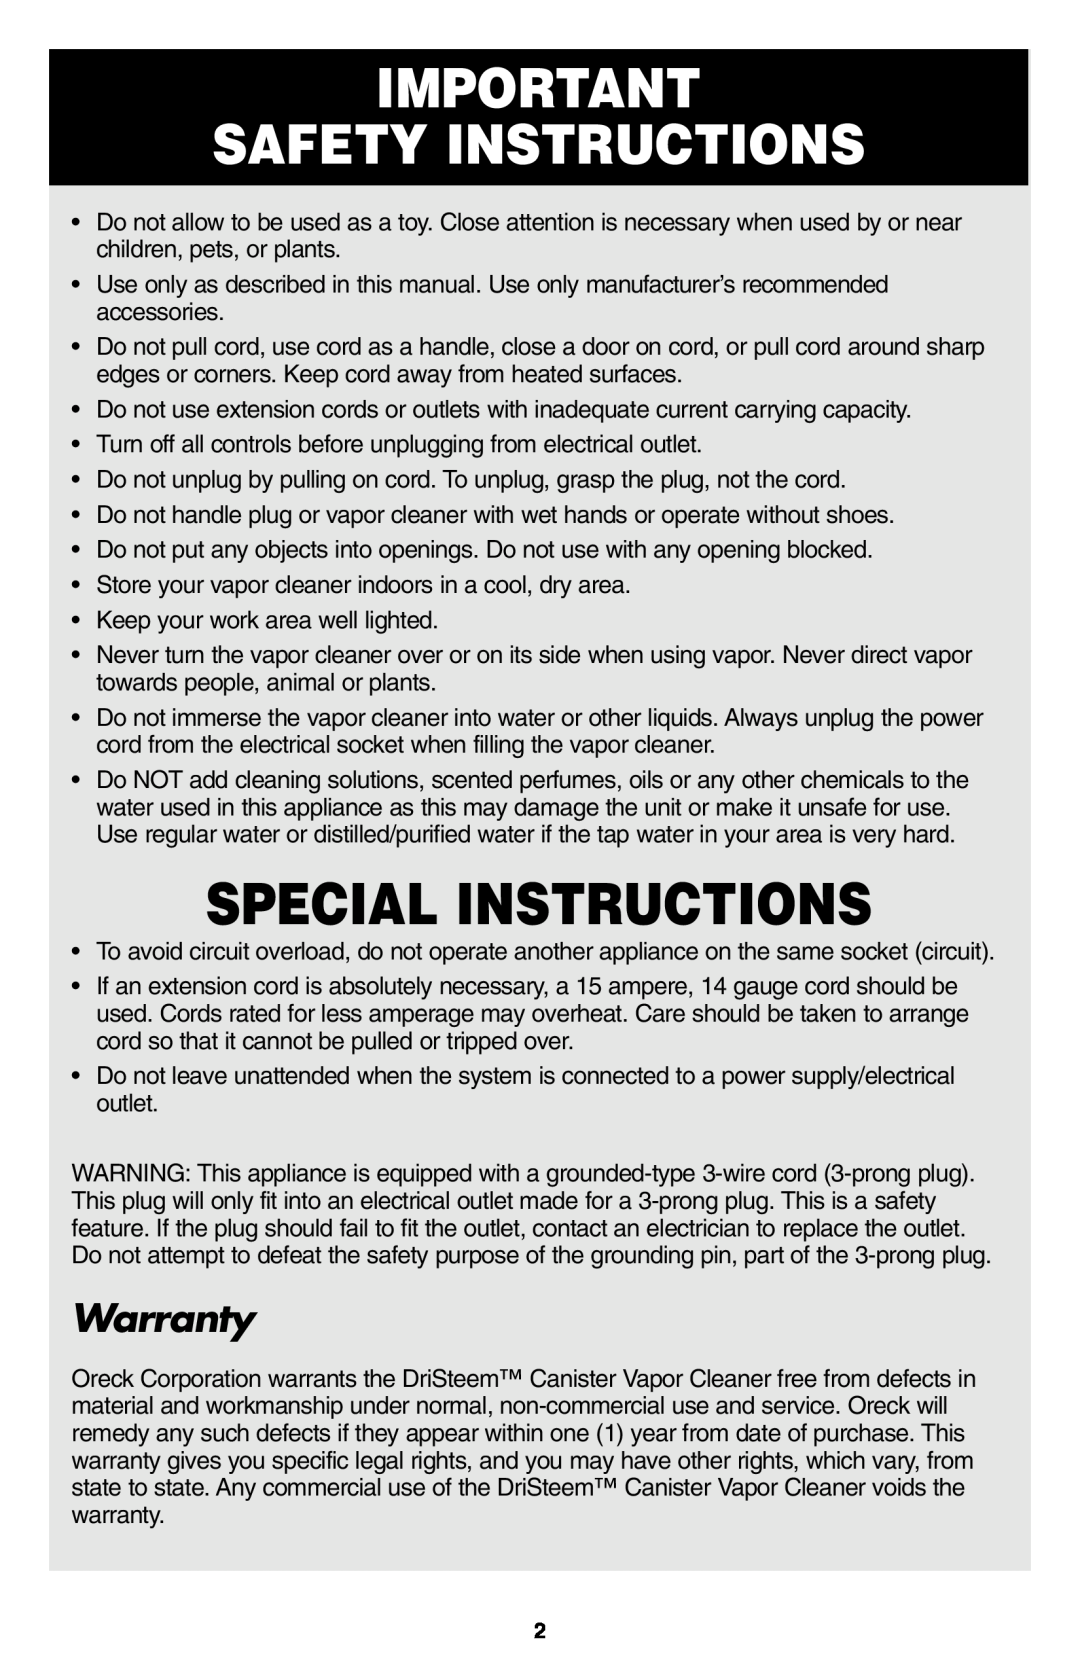 Oreck USER'S GUIDE warranty Special Instructions, Safety Instructions, Warranty 